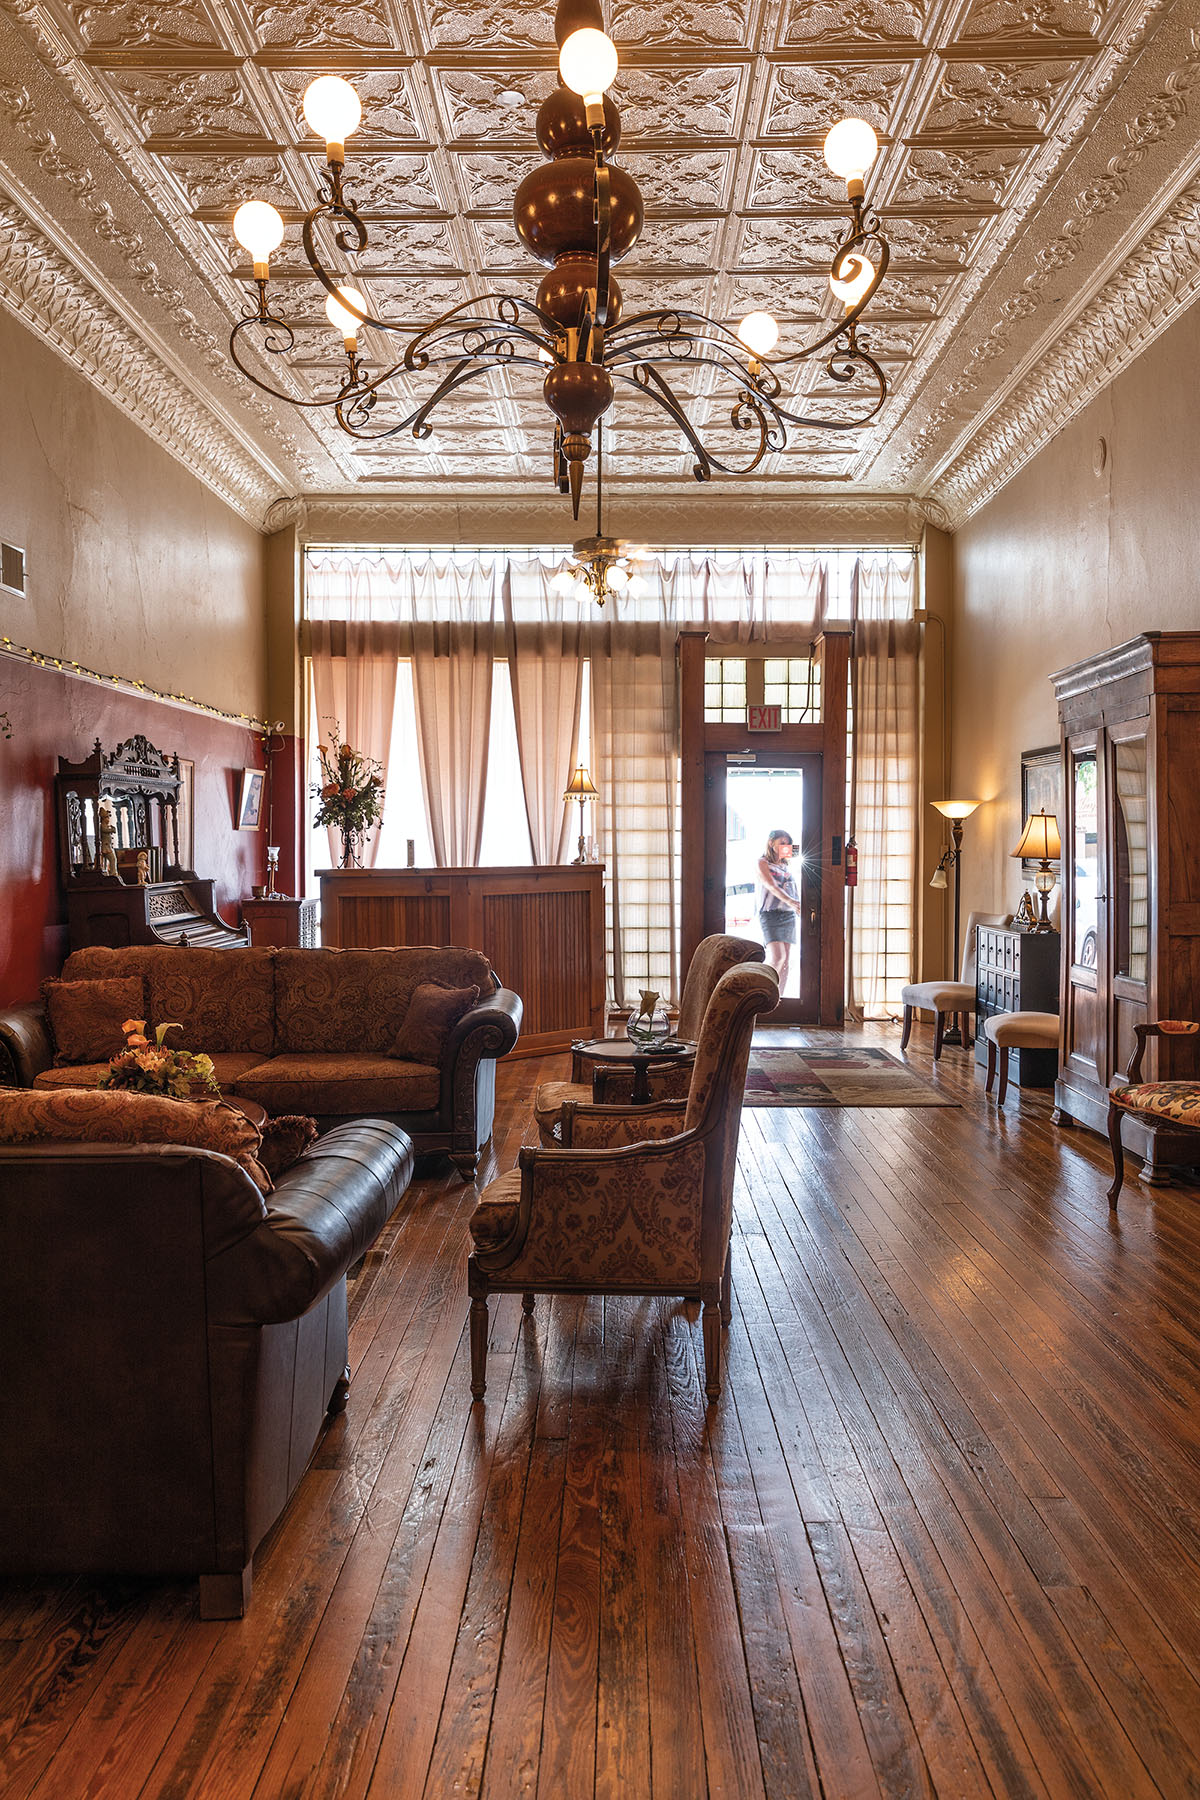 The inside of an ornate hotel with dark wood floors and vintage furniture